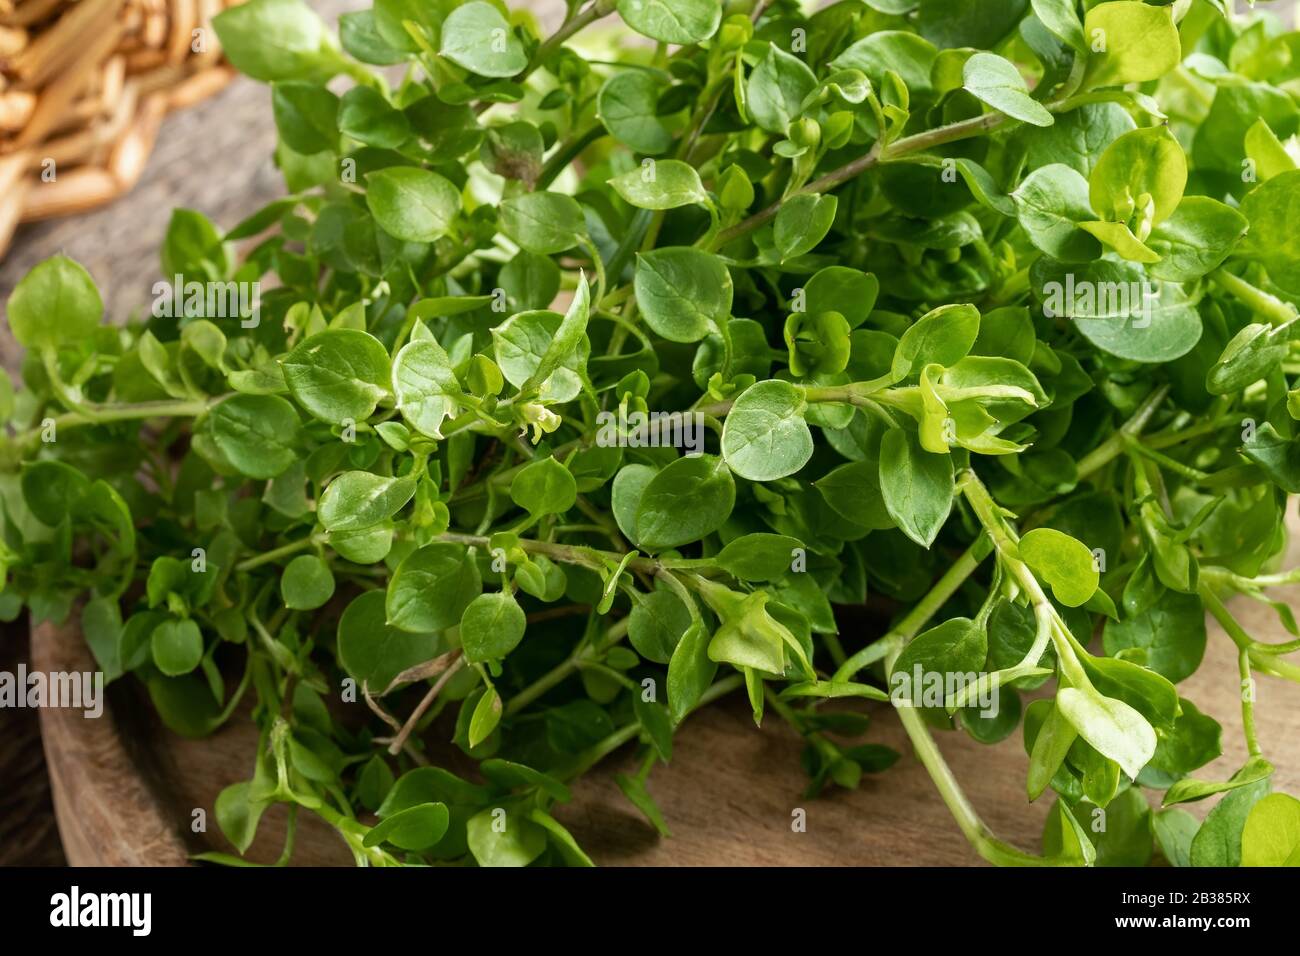 Chickweed or Stellaria media on a table - a wild edible plant collected in early spring Stock Photo